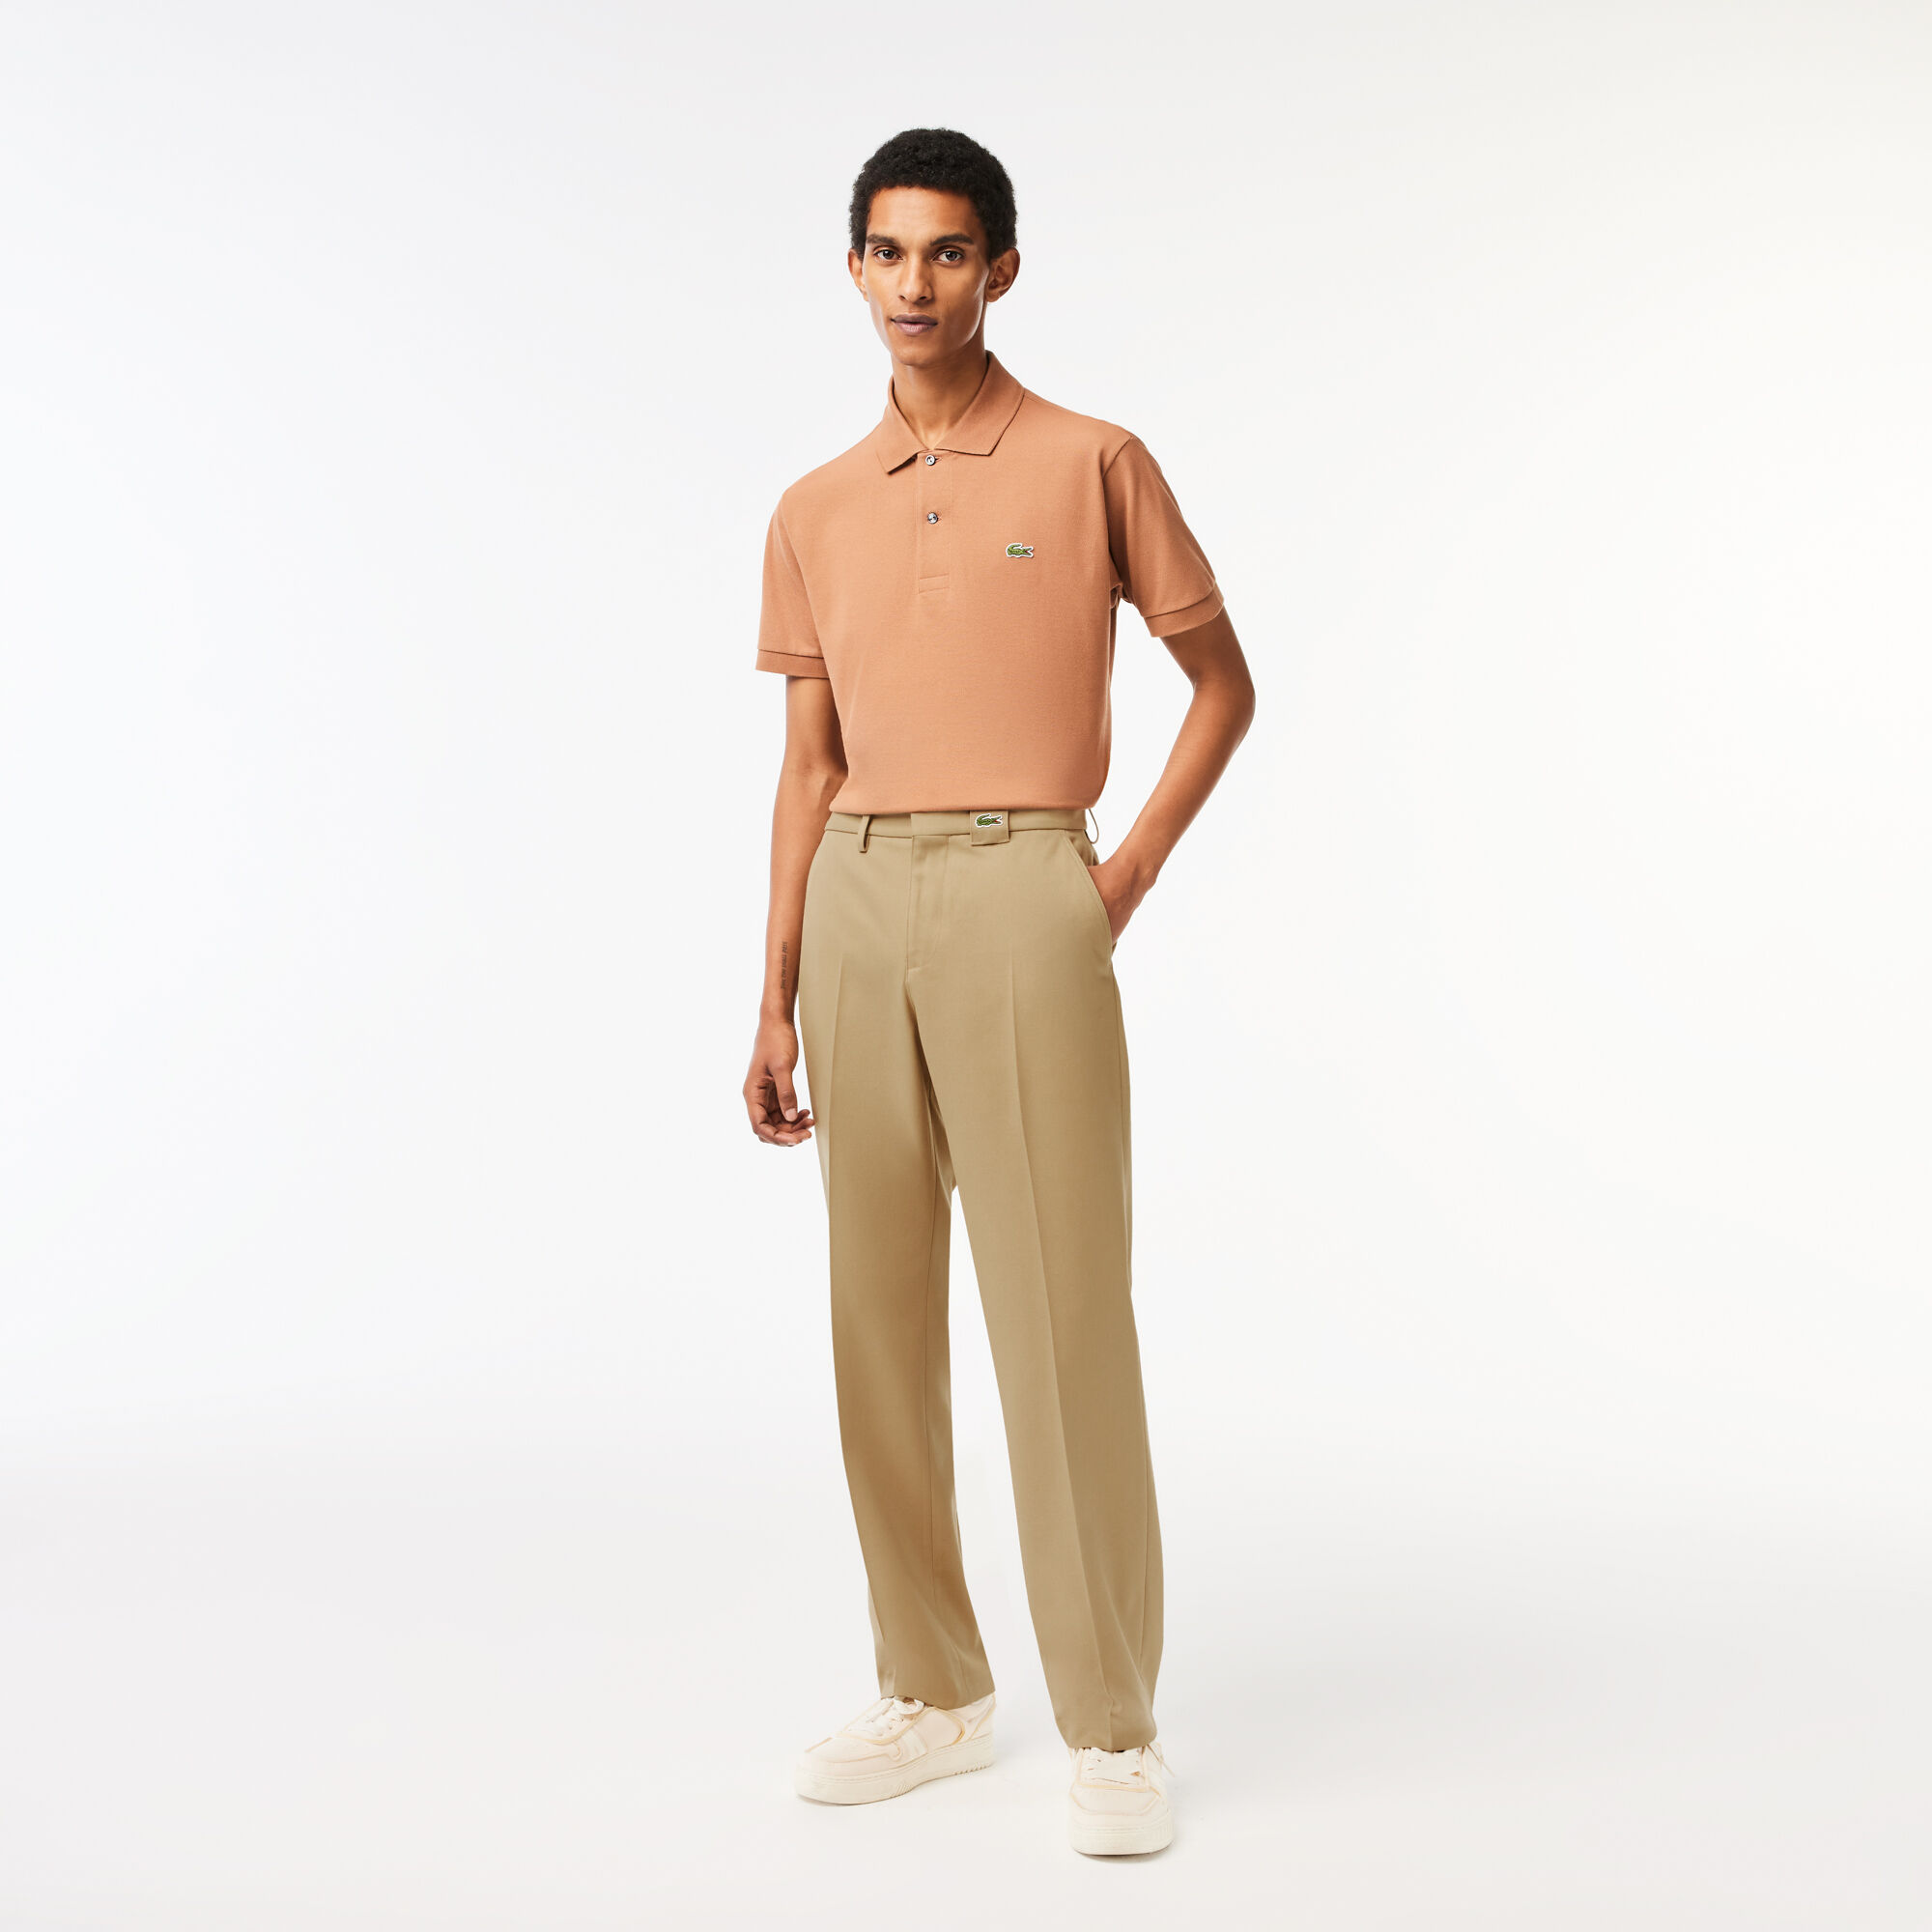 Lacoste Lacoste Denim Chino Pants Trousers size 34 | Grailed